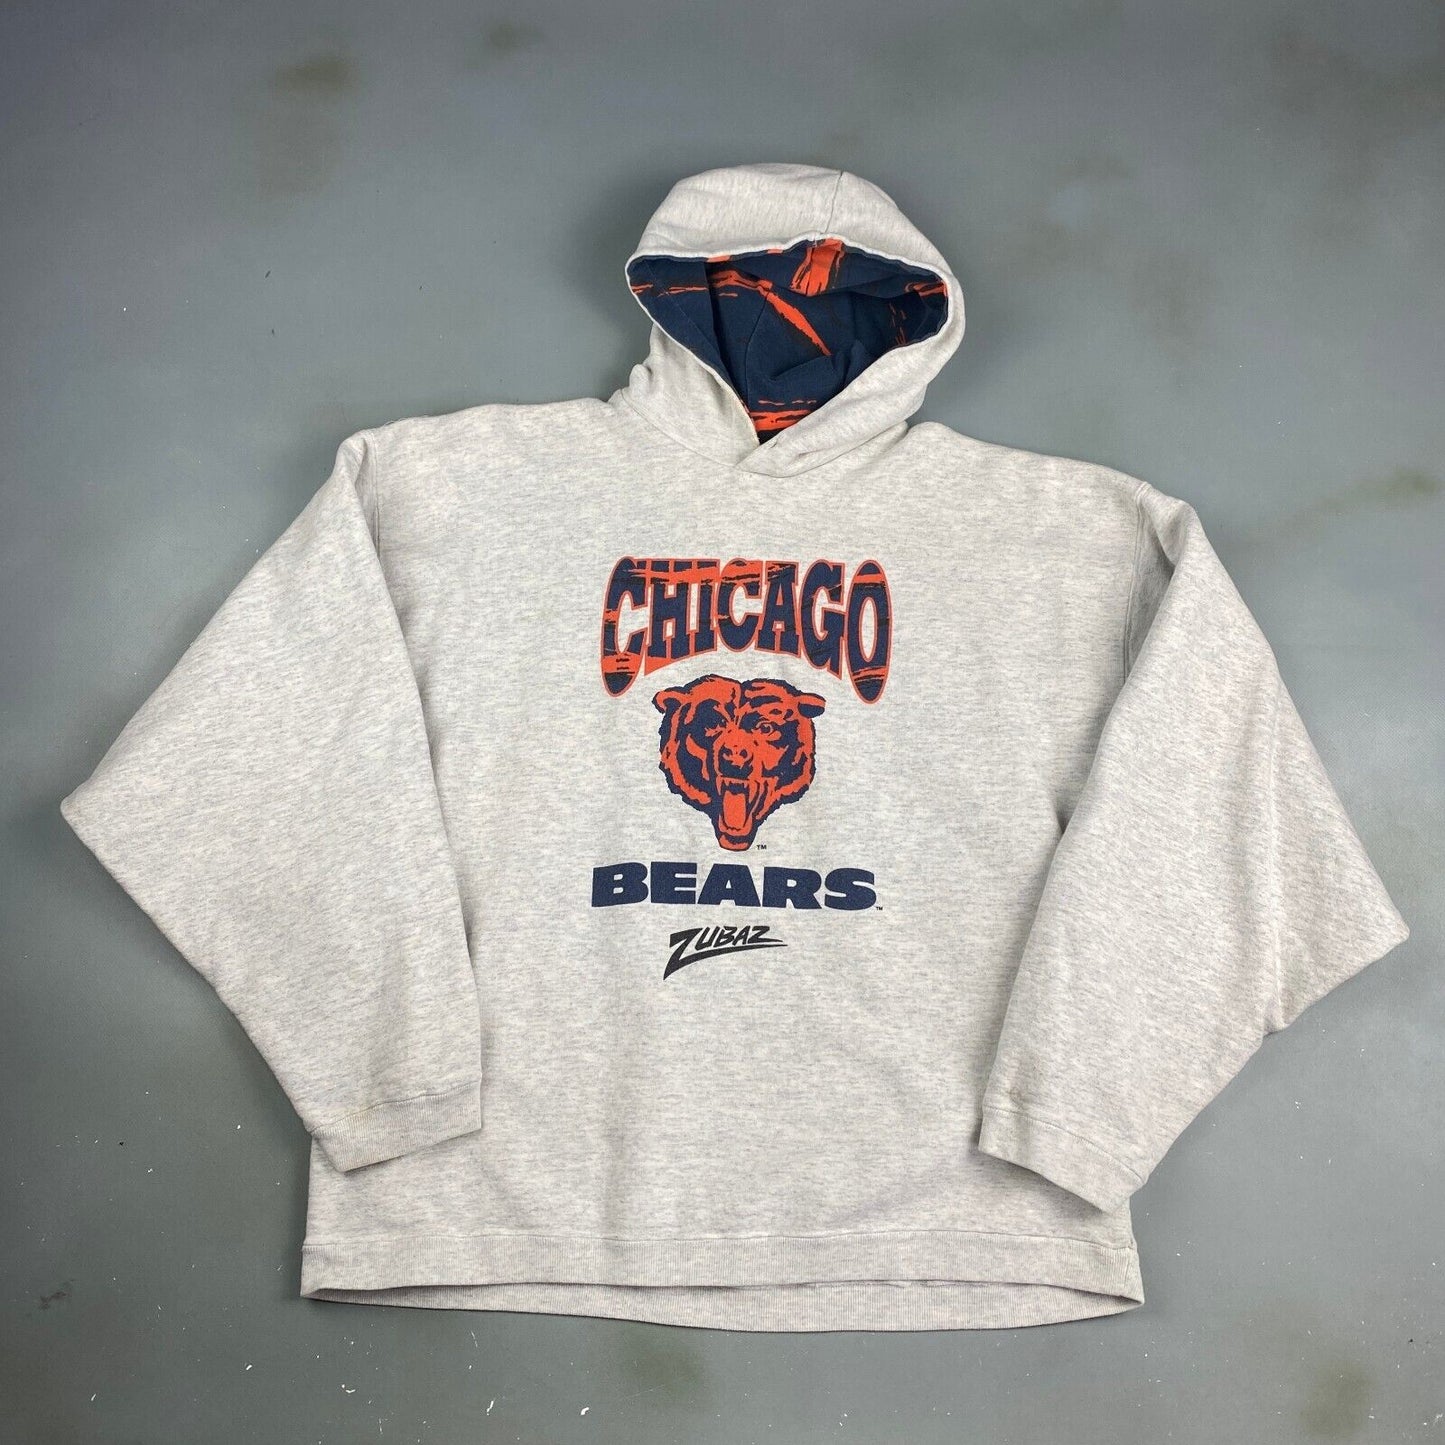 VINTAGE 90s Chicago Bears Zubaz Grey Hoodie Sweater sz XL Mens Made in USA